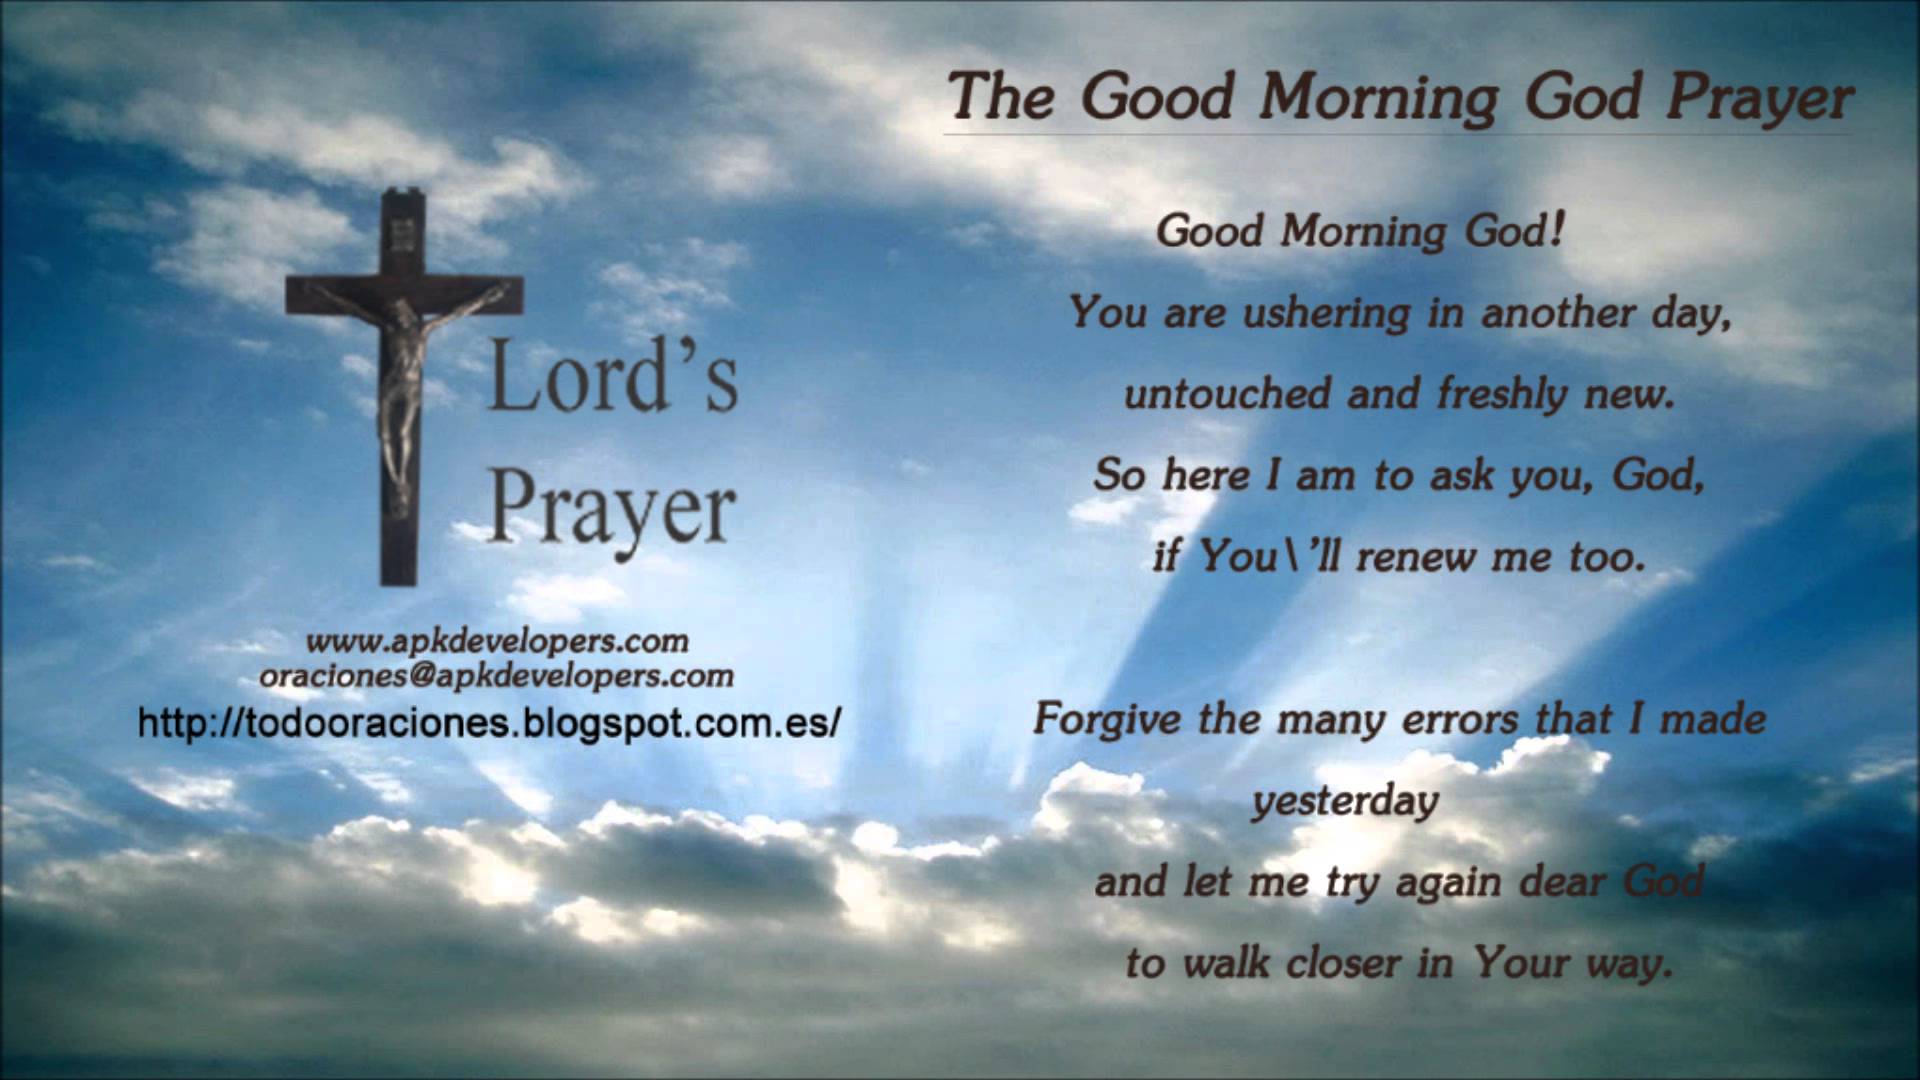 17 Good Morning Wishes With Prayer Good Morning Wishes | vlr.eng.br